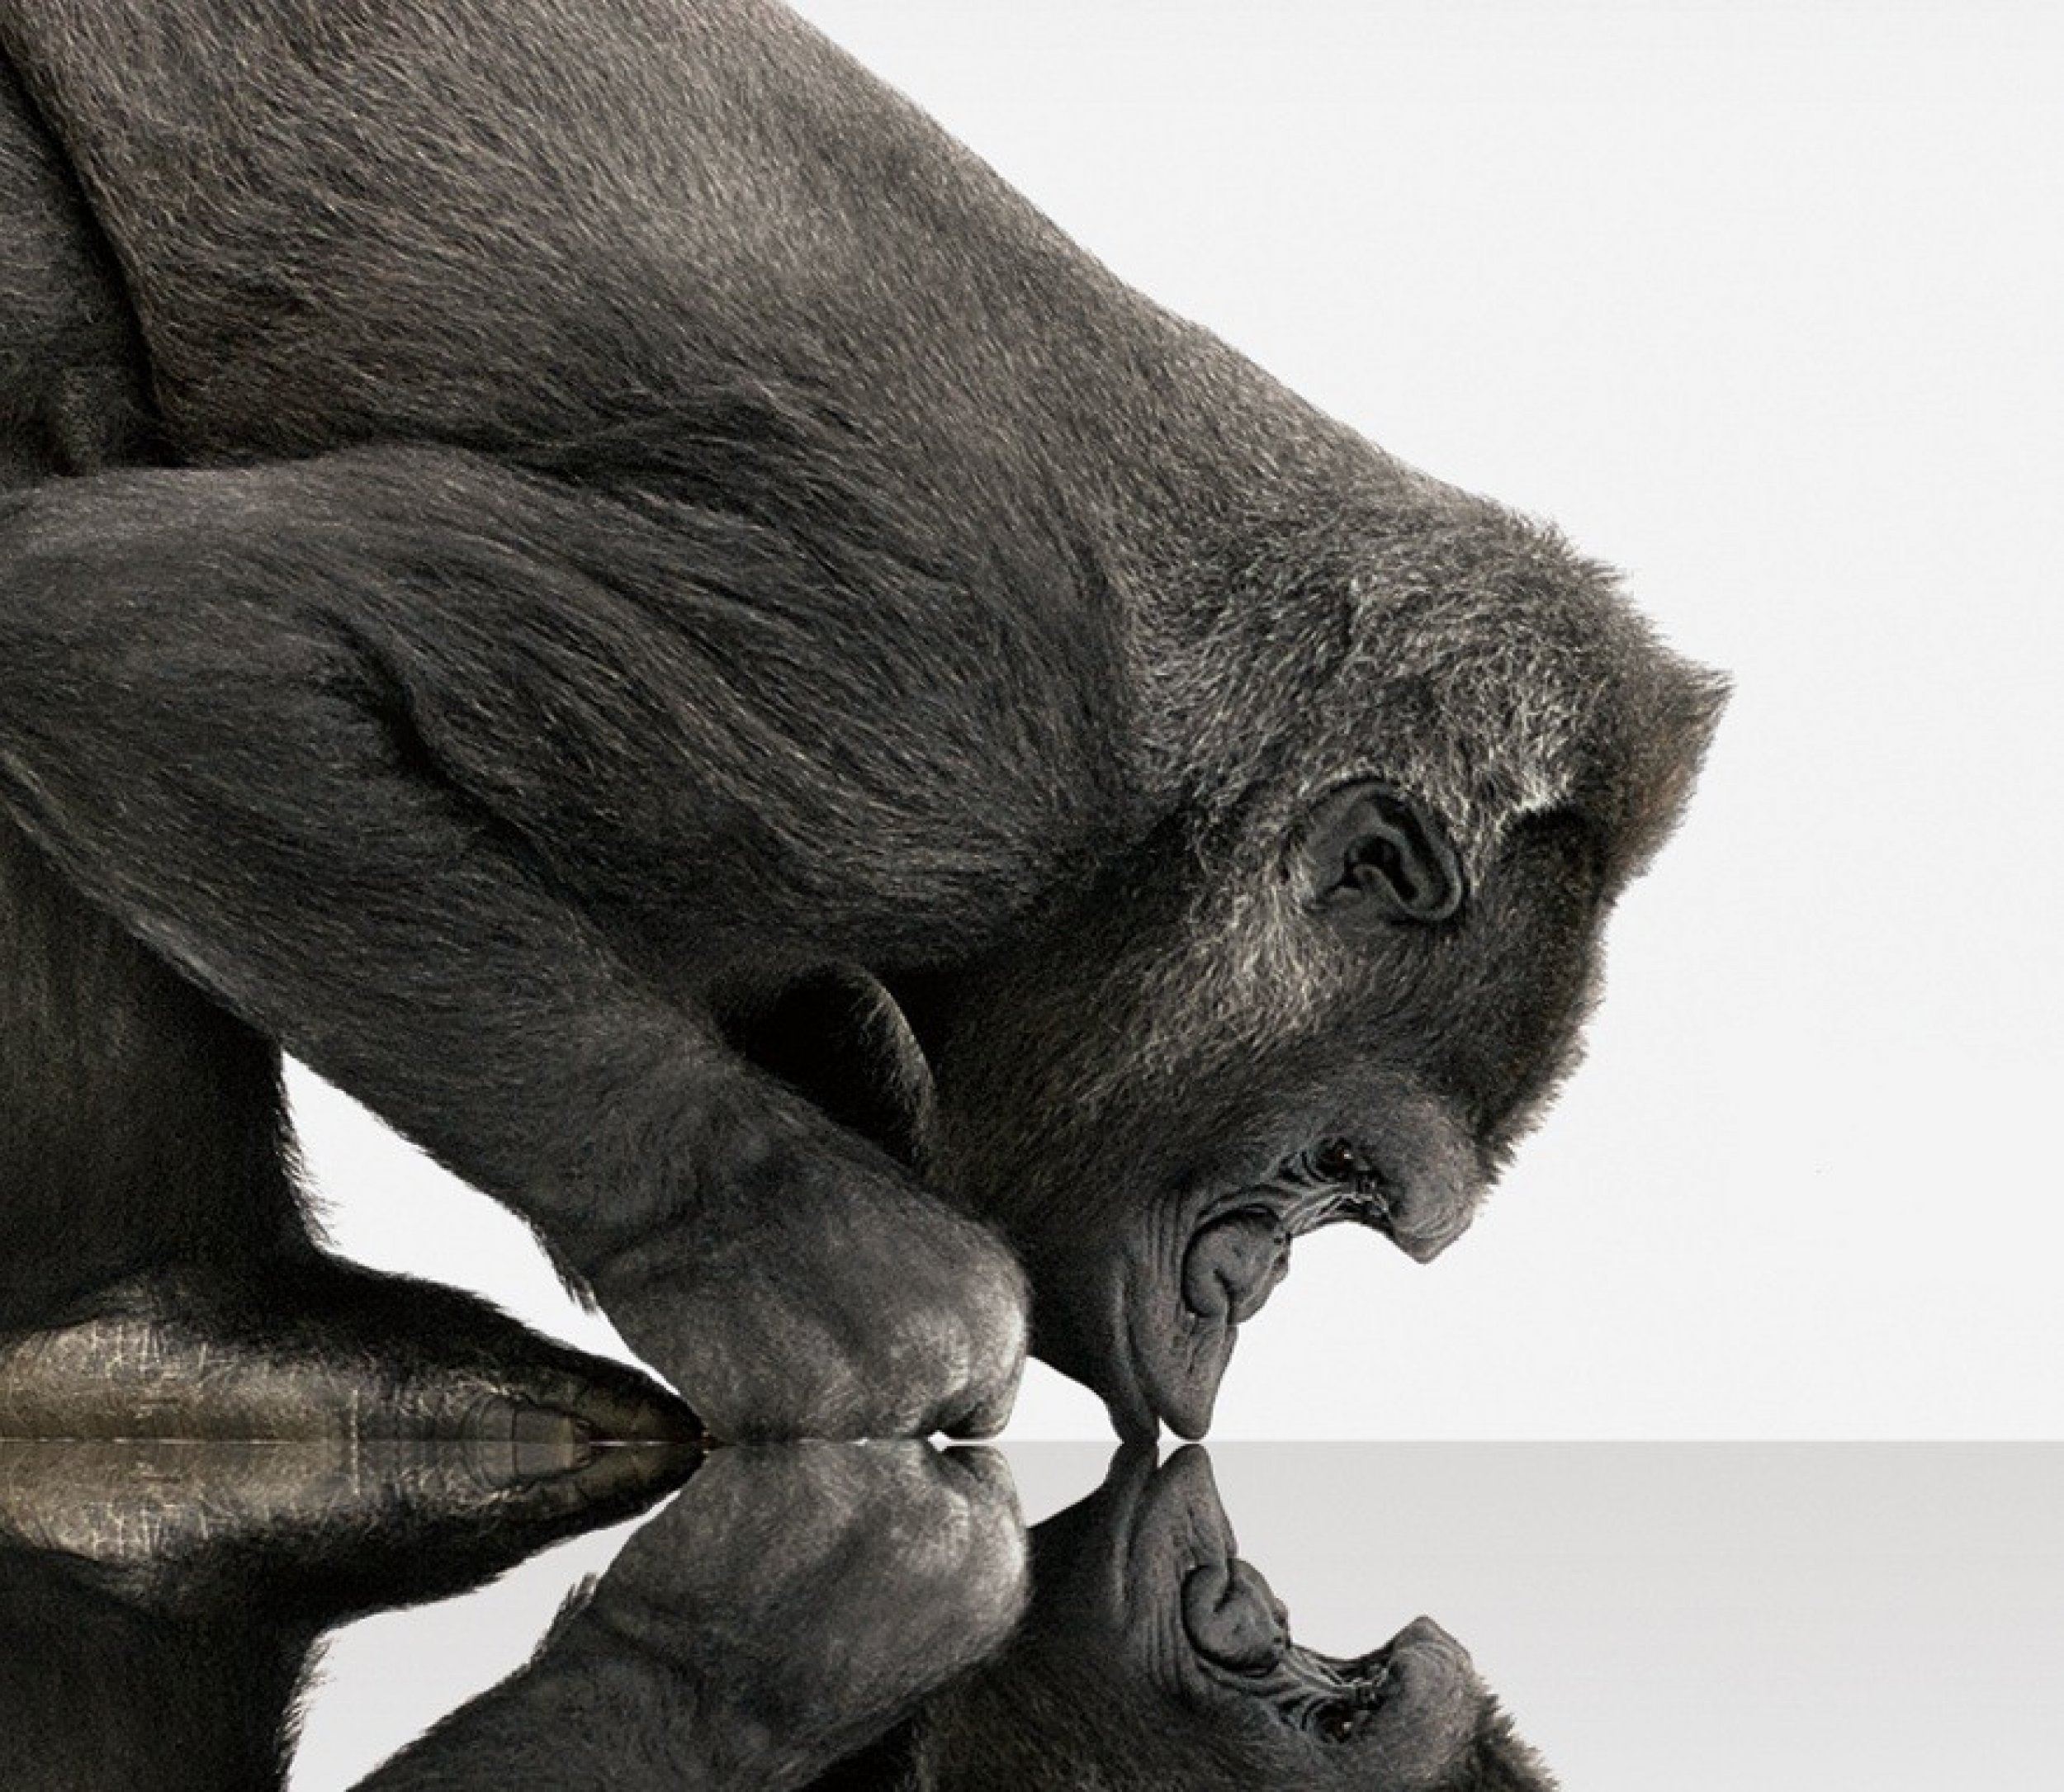 At CES 2012, Corning will introduce the next-generation of its damage-resistant specialty glass for TVs, PCs, smartphones and tablets called Gorilla Glass 2. The new glass is said to be thinner than Gorilla Glass but maintain its predecessors ultra-stren